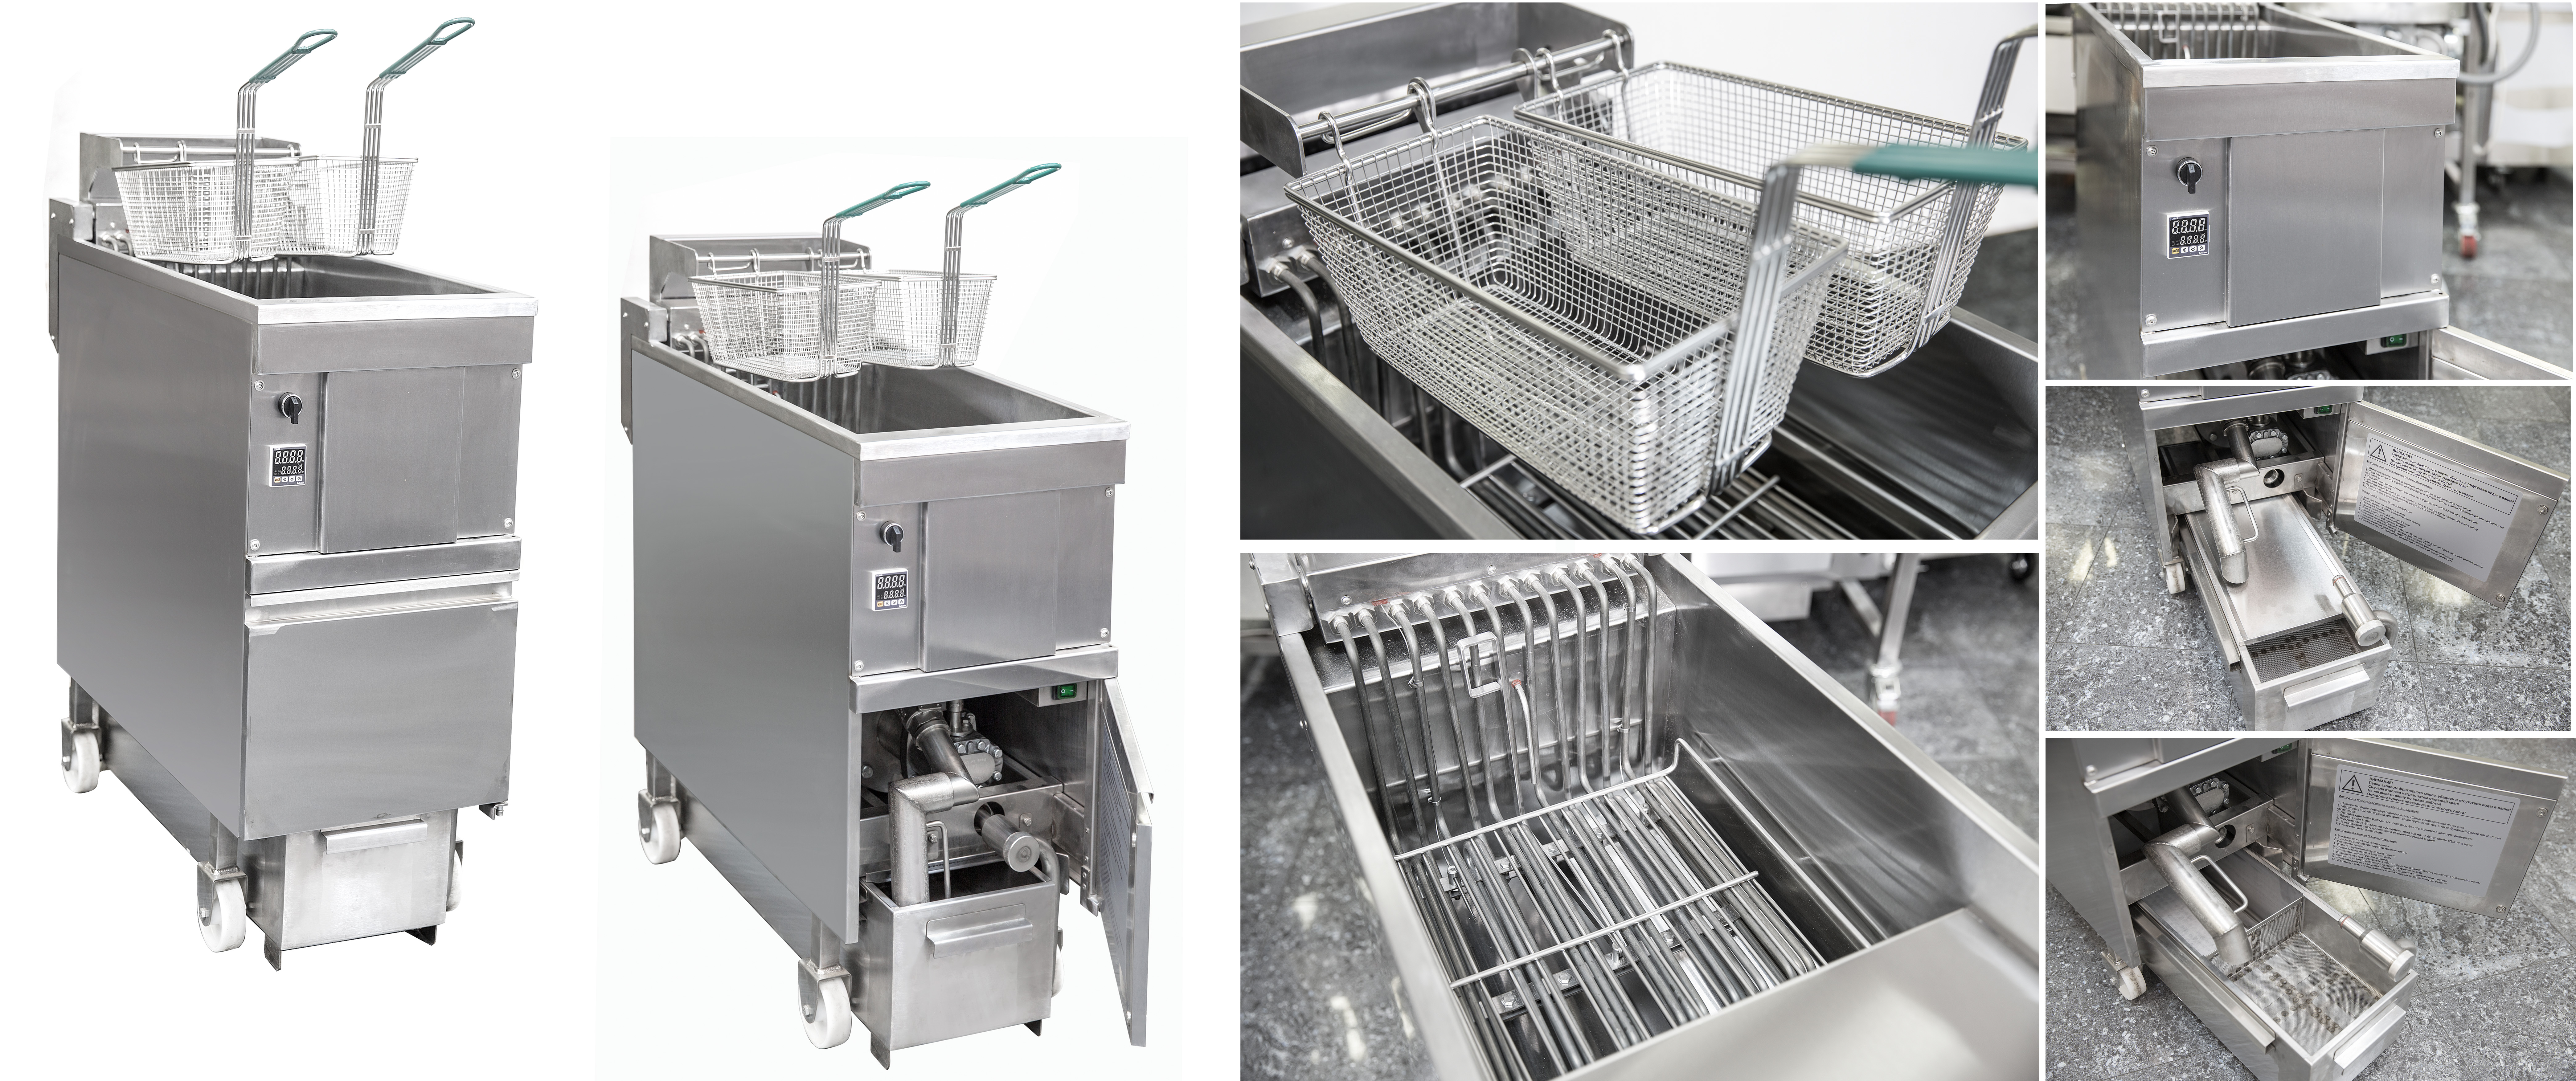 RoboFry EF  Heavy Duty Fryer with filtration